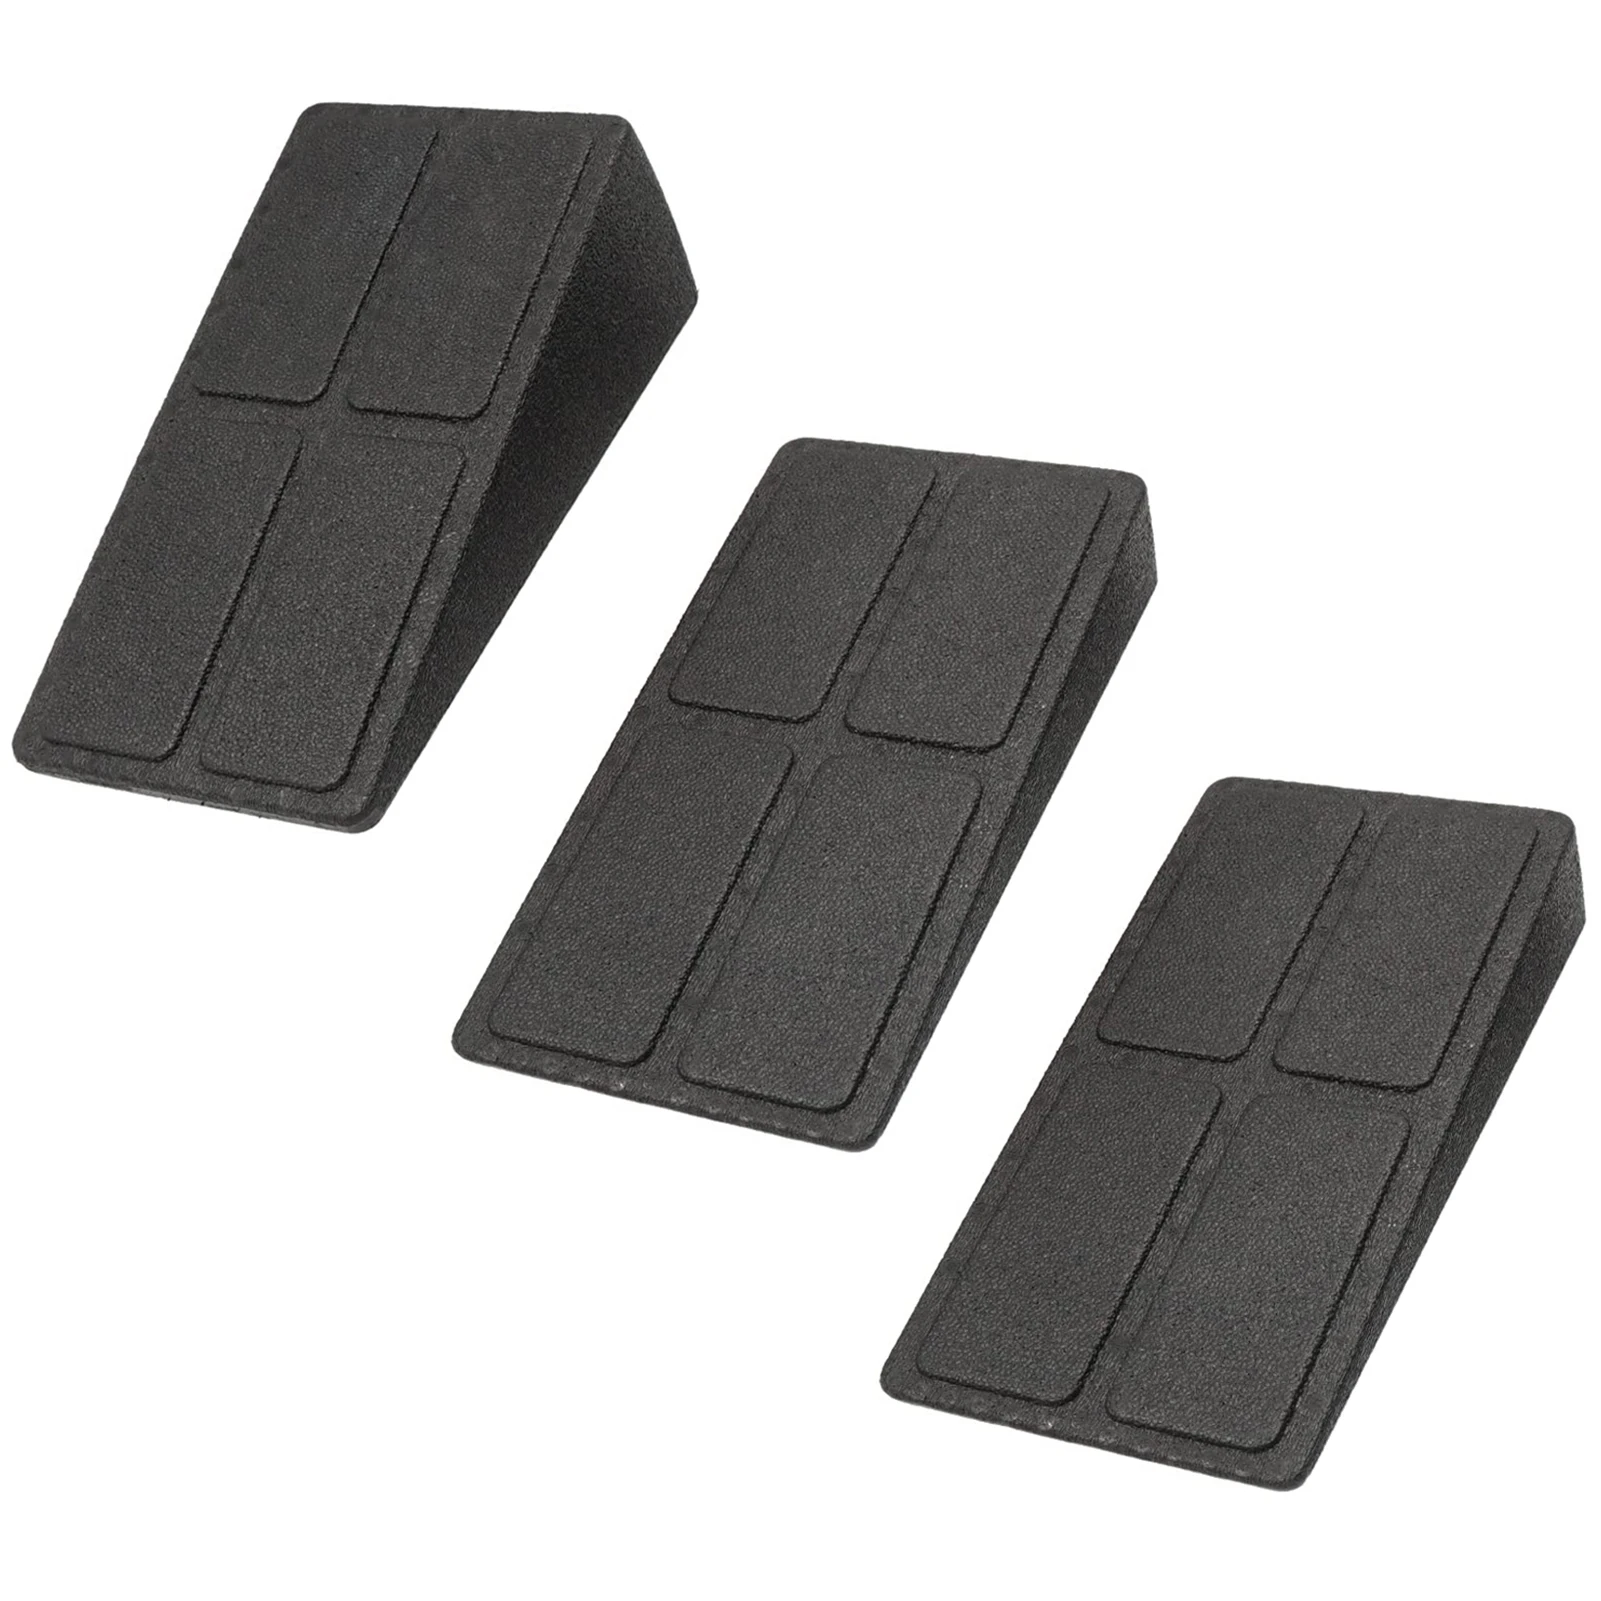 

Posture Board 3PCS Slant Board For Calf Stretching Adjustable Calf Stretch Wedge Incline Board Achilles Stretcher For Plantar